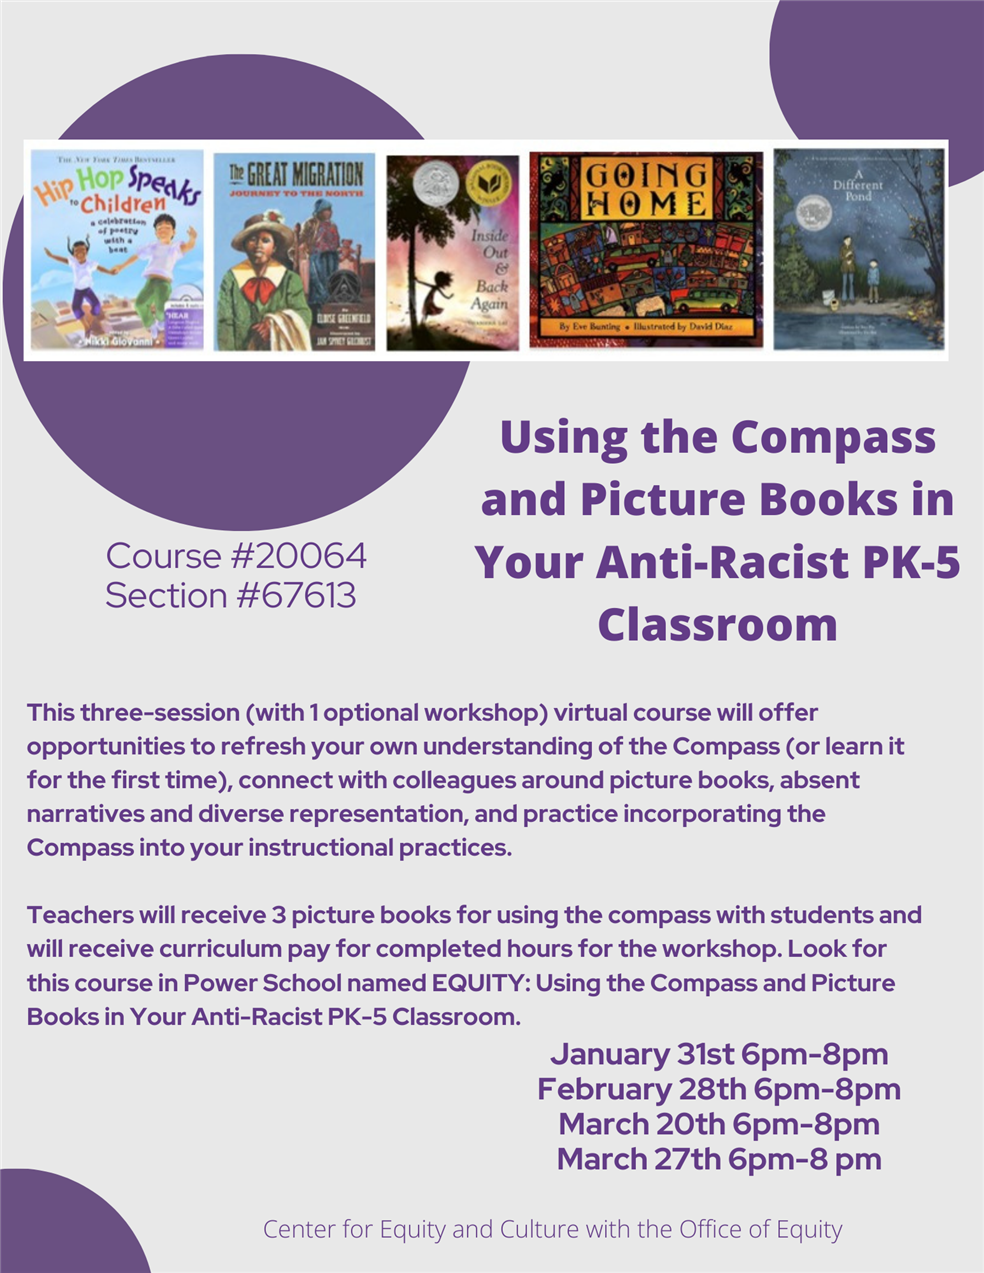 Spring Cohort for Using the Compass in Picture Books is coming up!